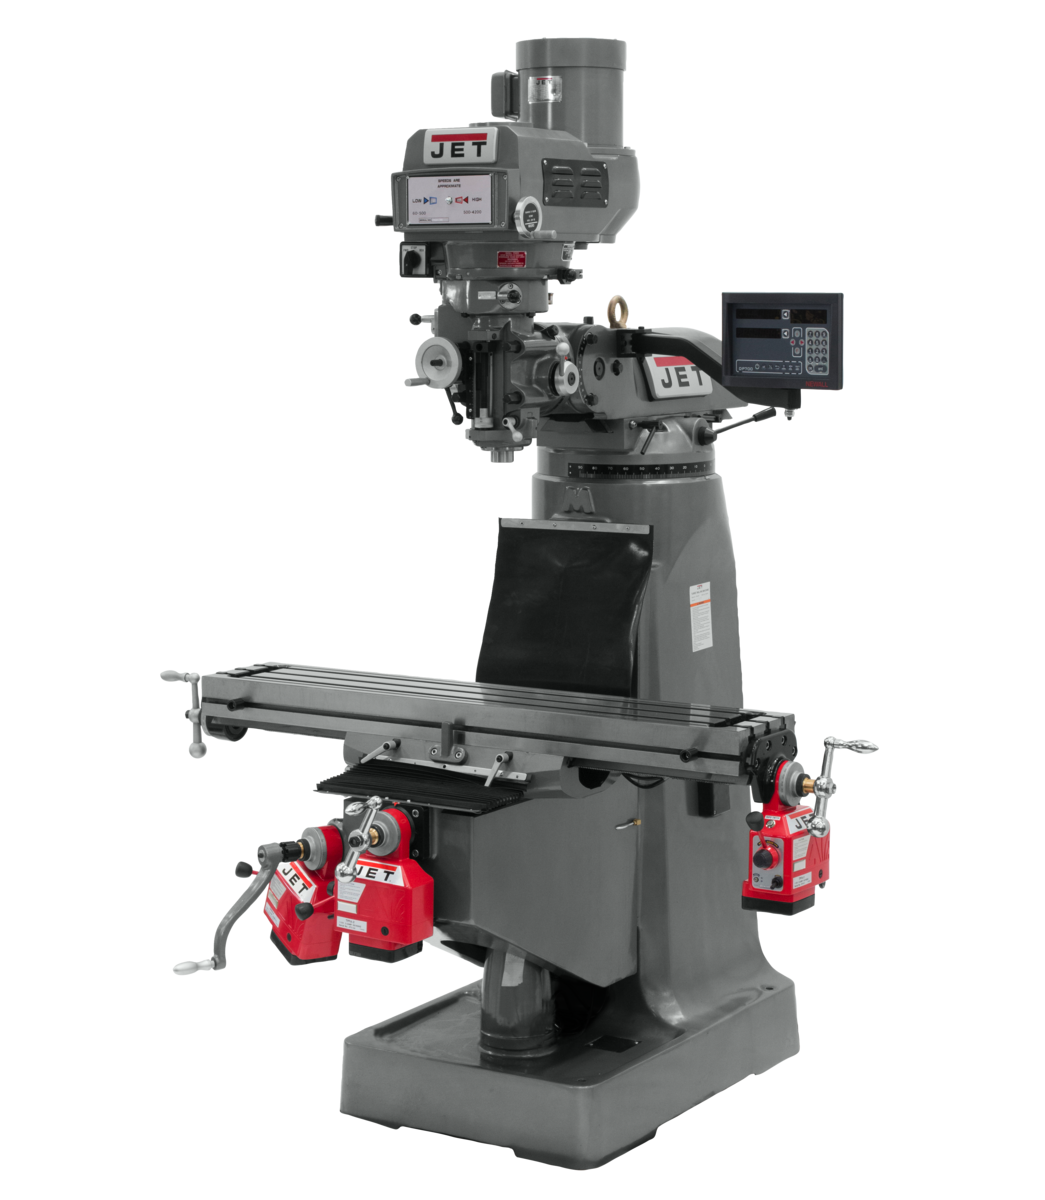 JTM-4VS Mill With 3-Axis Newall DP700 DRO (Knee) With X, Y and Z-Axis Powerfeeds